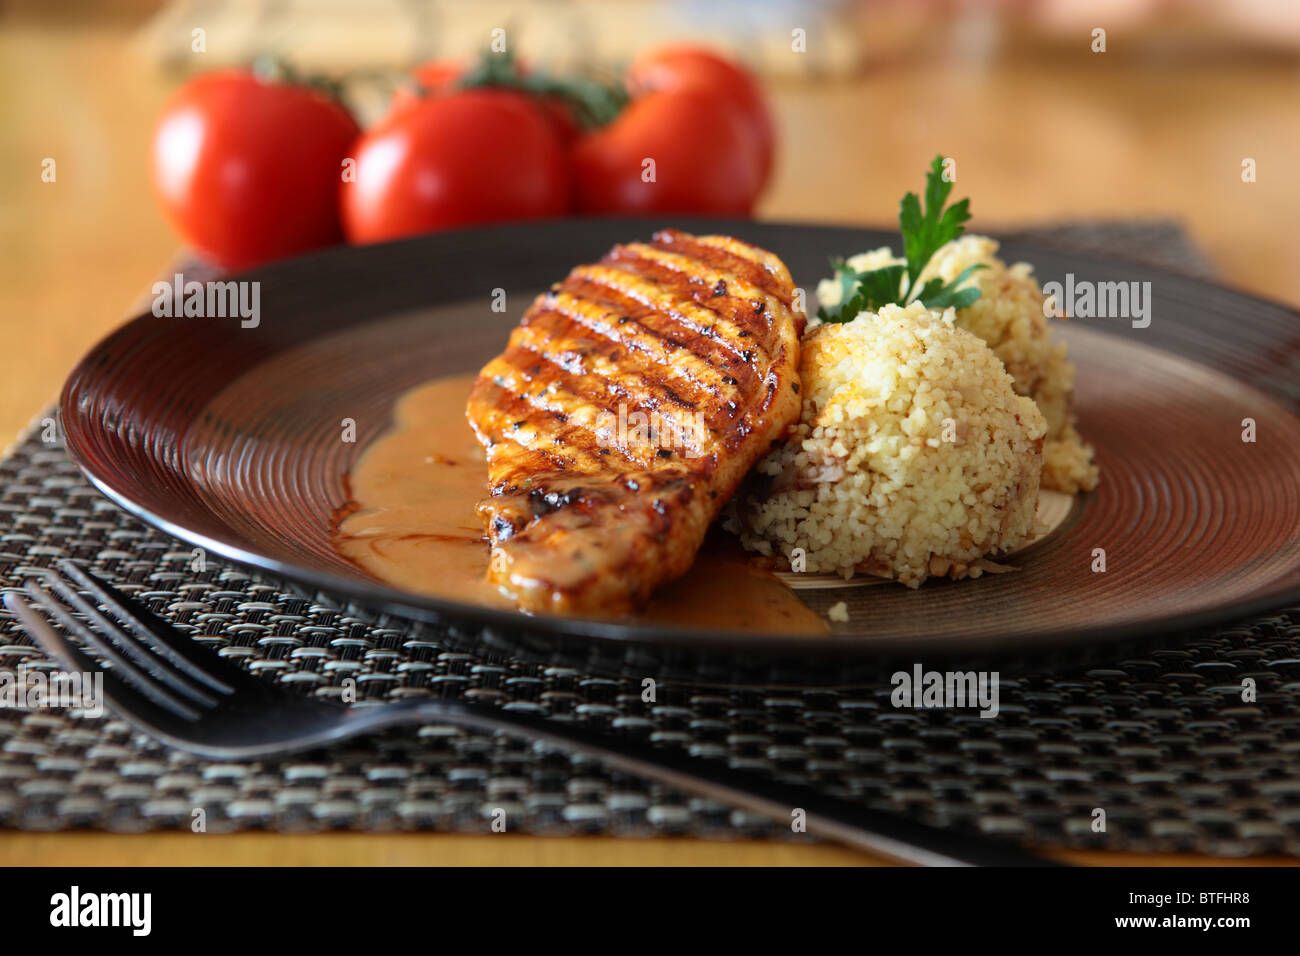 Pork With Pepper Sauce and Cous-Cous On a Plate Stock Photo